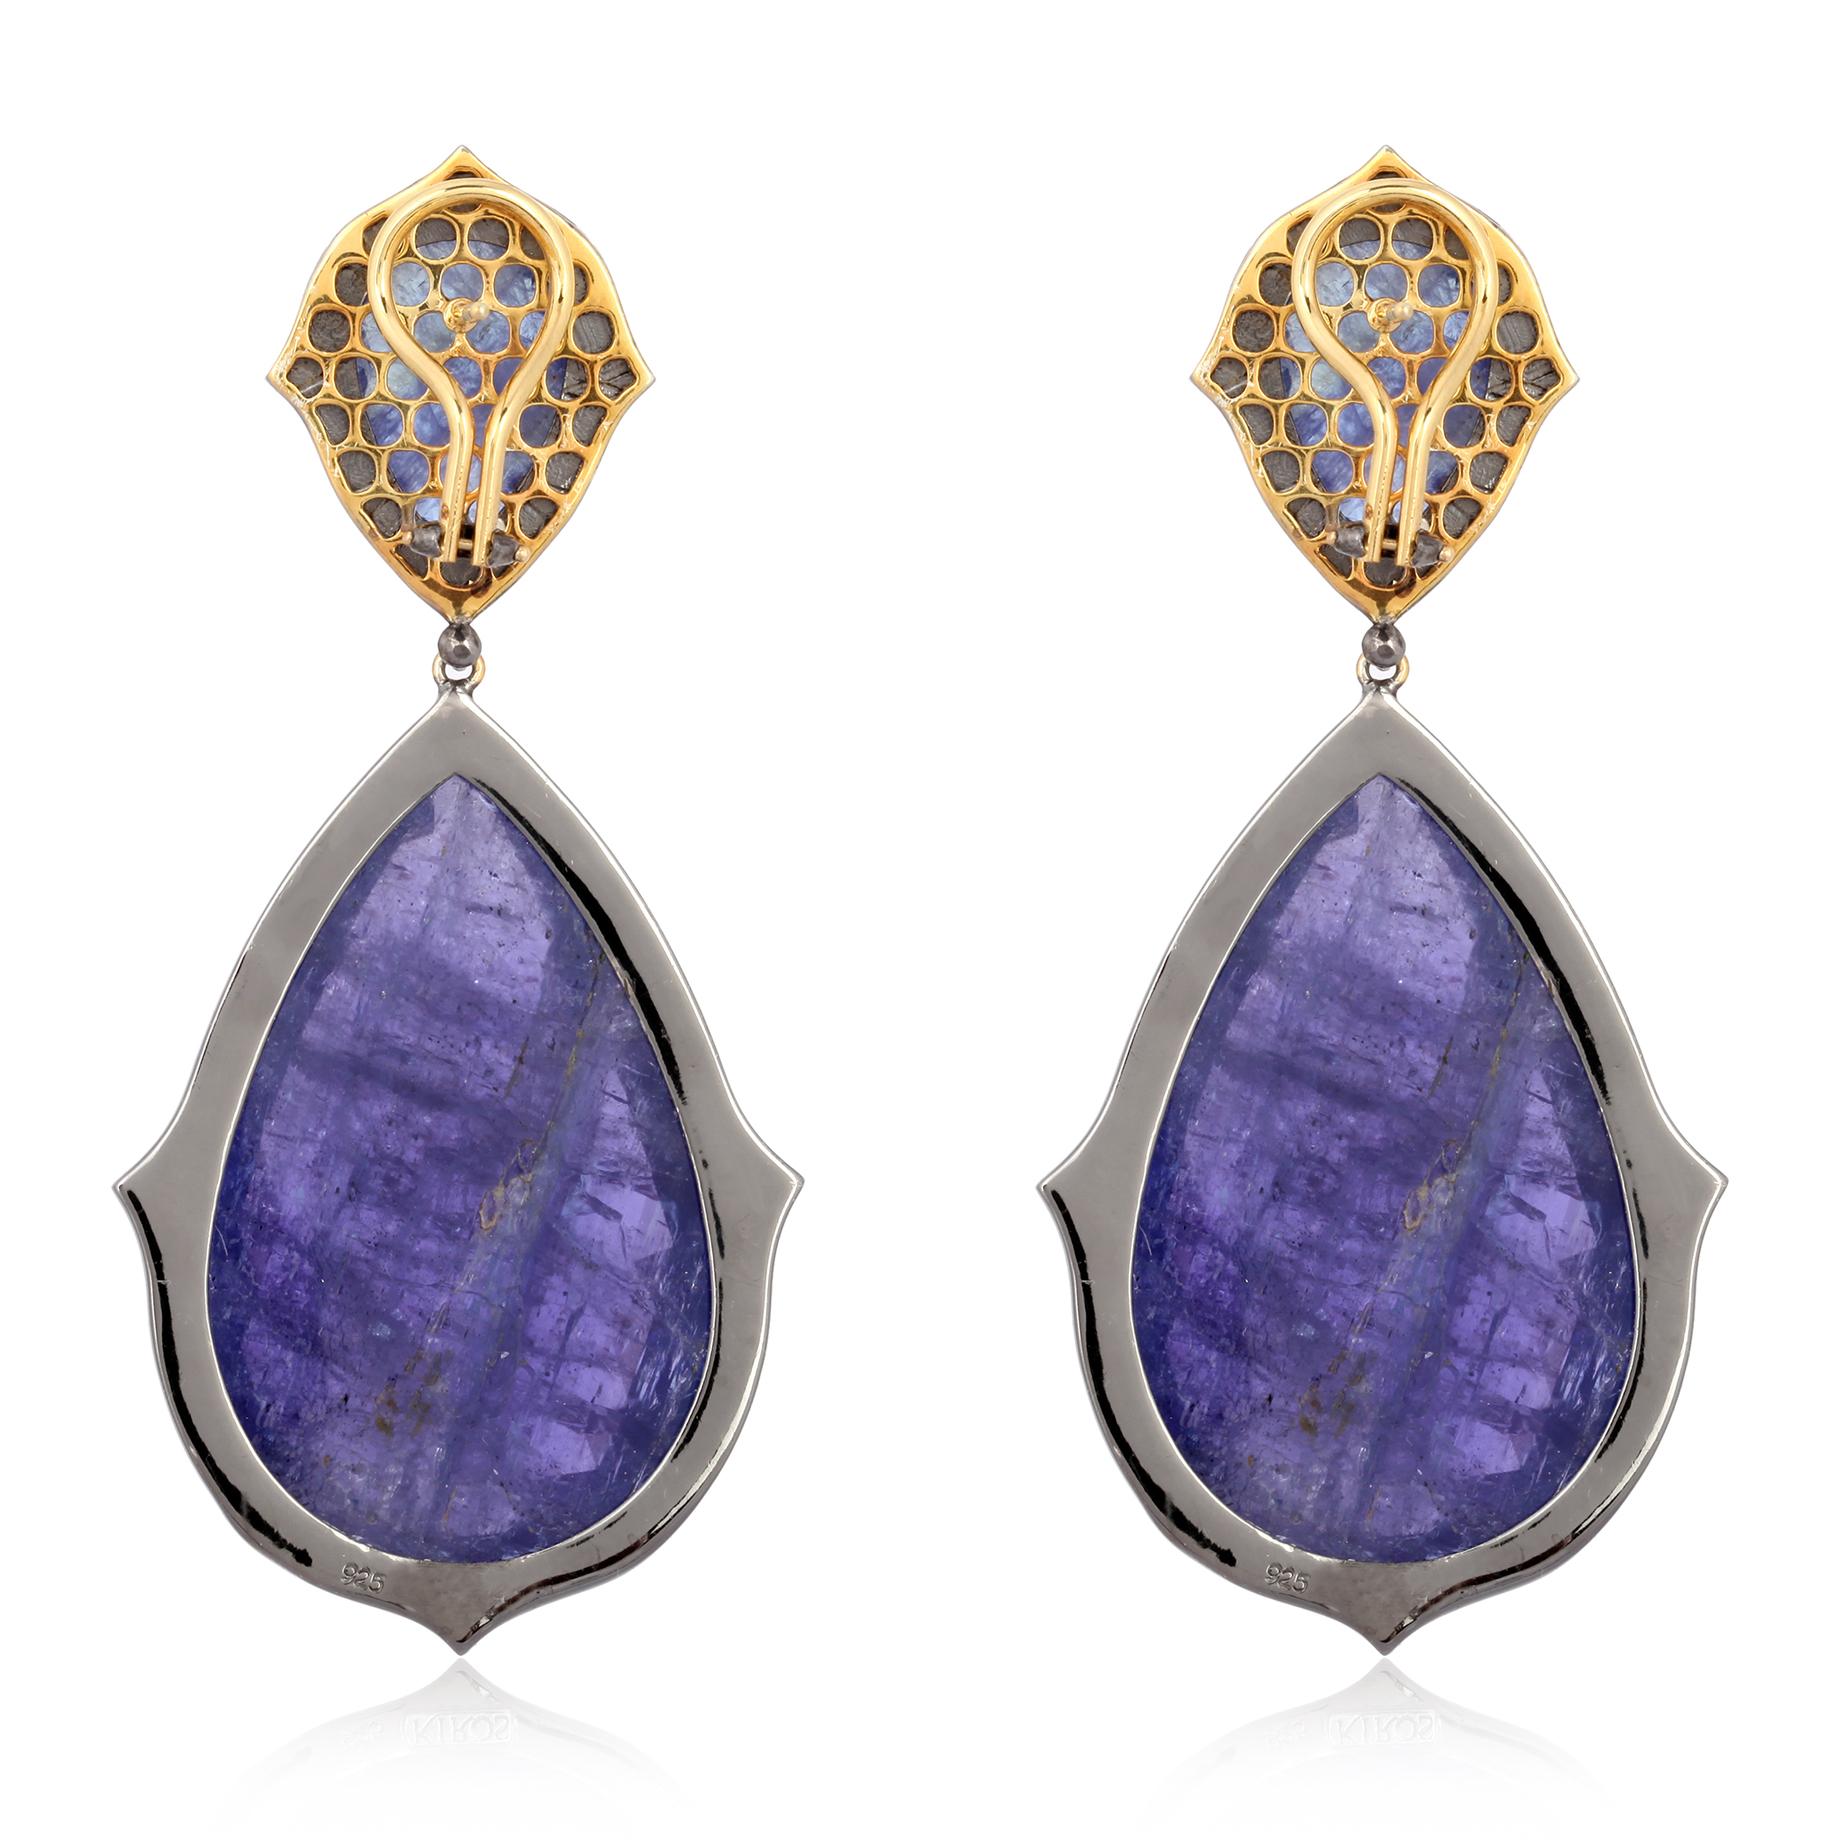 Cast in 18-karat gold & sterling silver, these stunning drop earrings are set with 146.9 carats tanzanite and 2.06 carats of sparkling diamonds. 

FOLLOW  MEGHNA JEWELS storefront to view the latest collection & exclusive pieces.  Meghna Jewels is